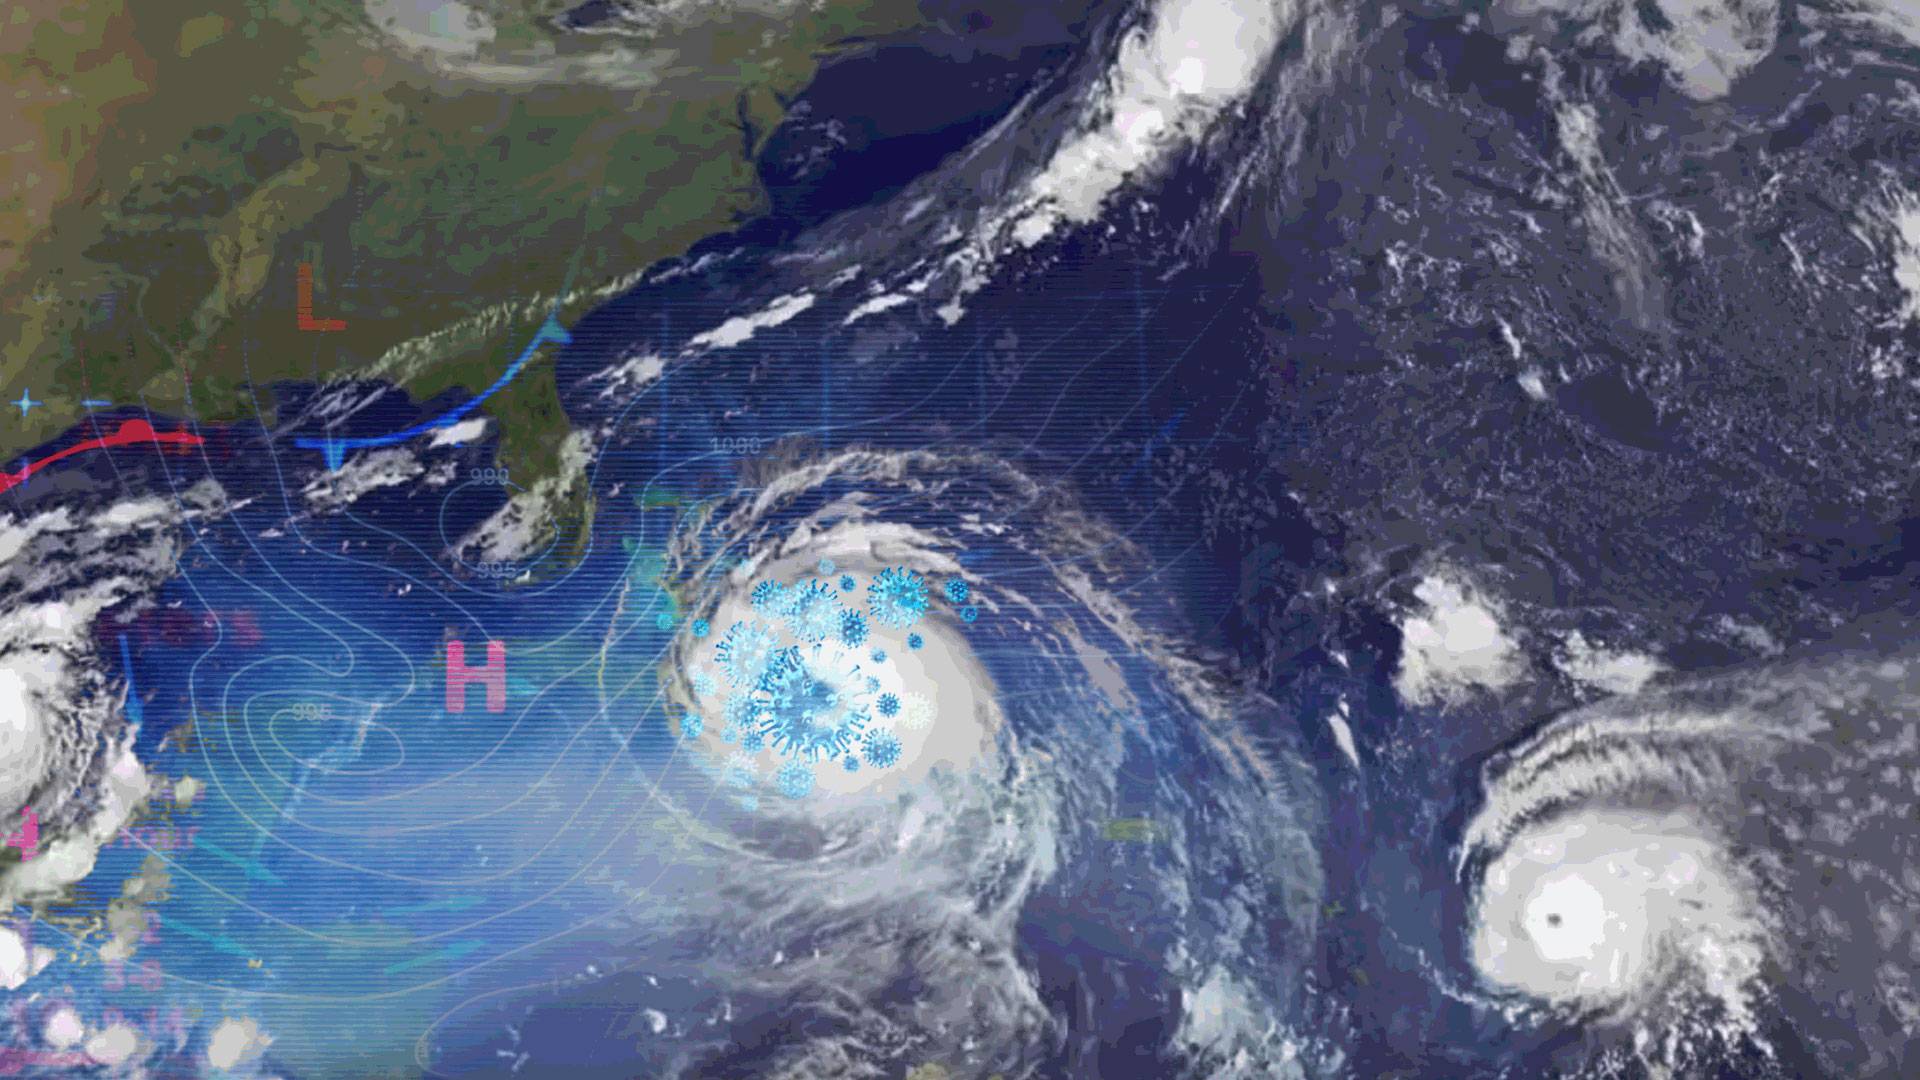 Illustration of weather satellite imagery of a hurricane with COVID virus forms